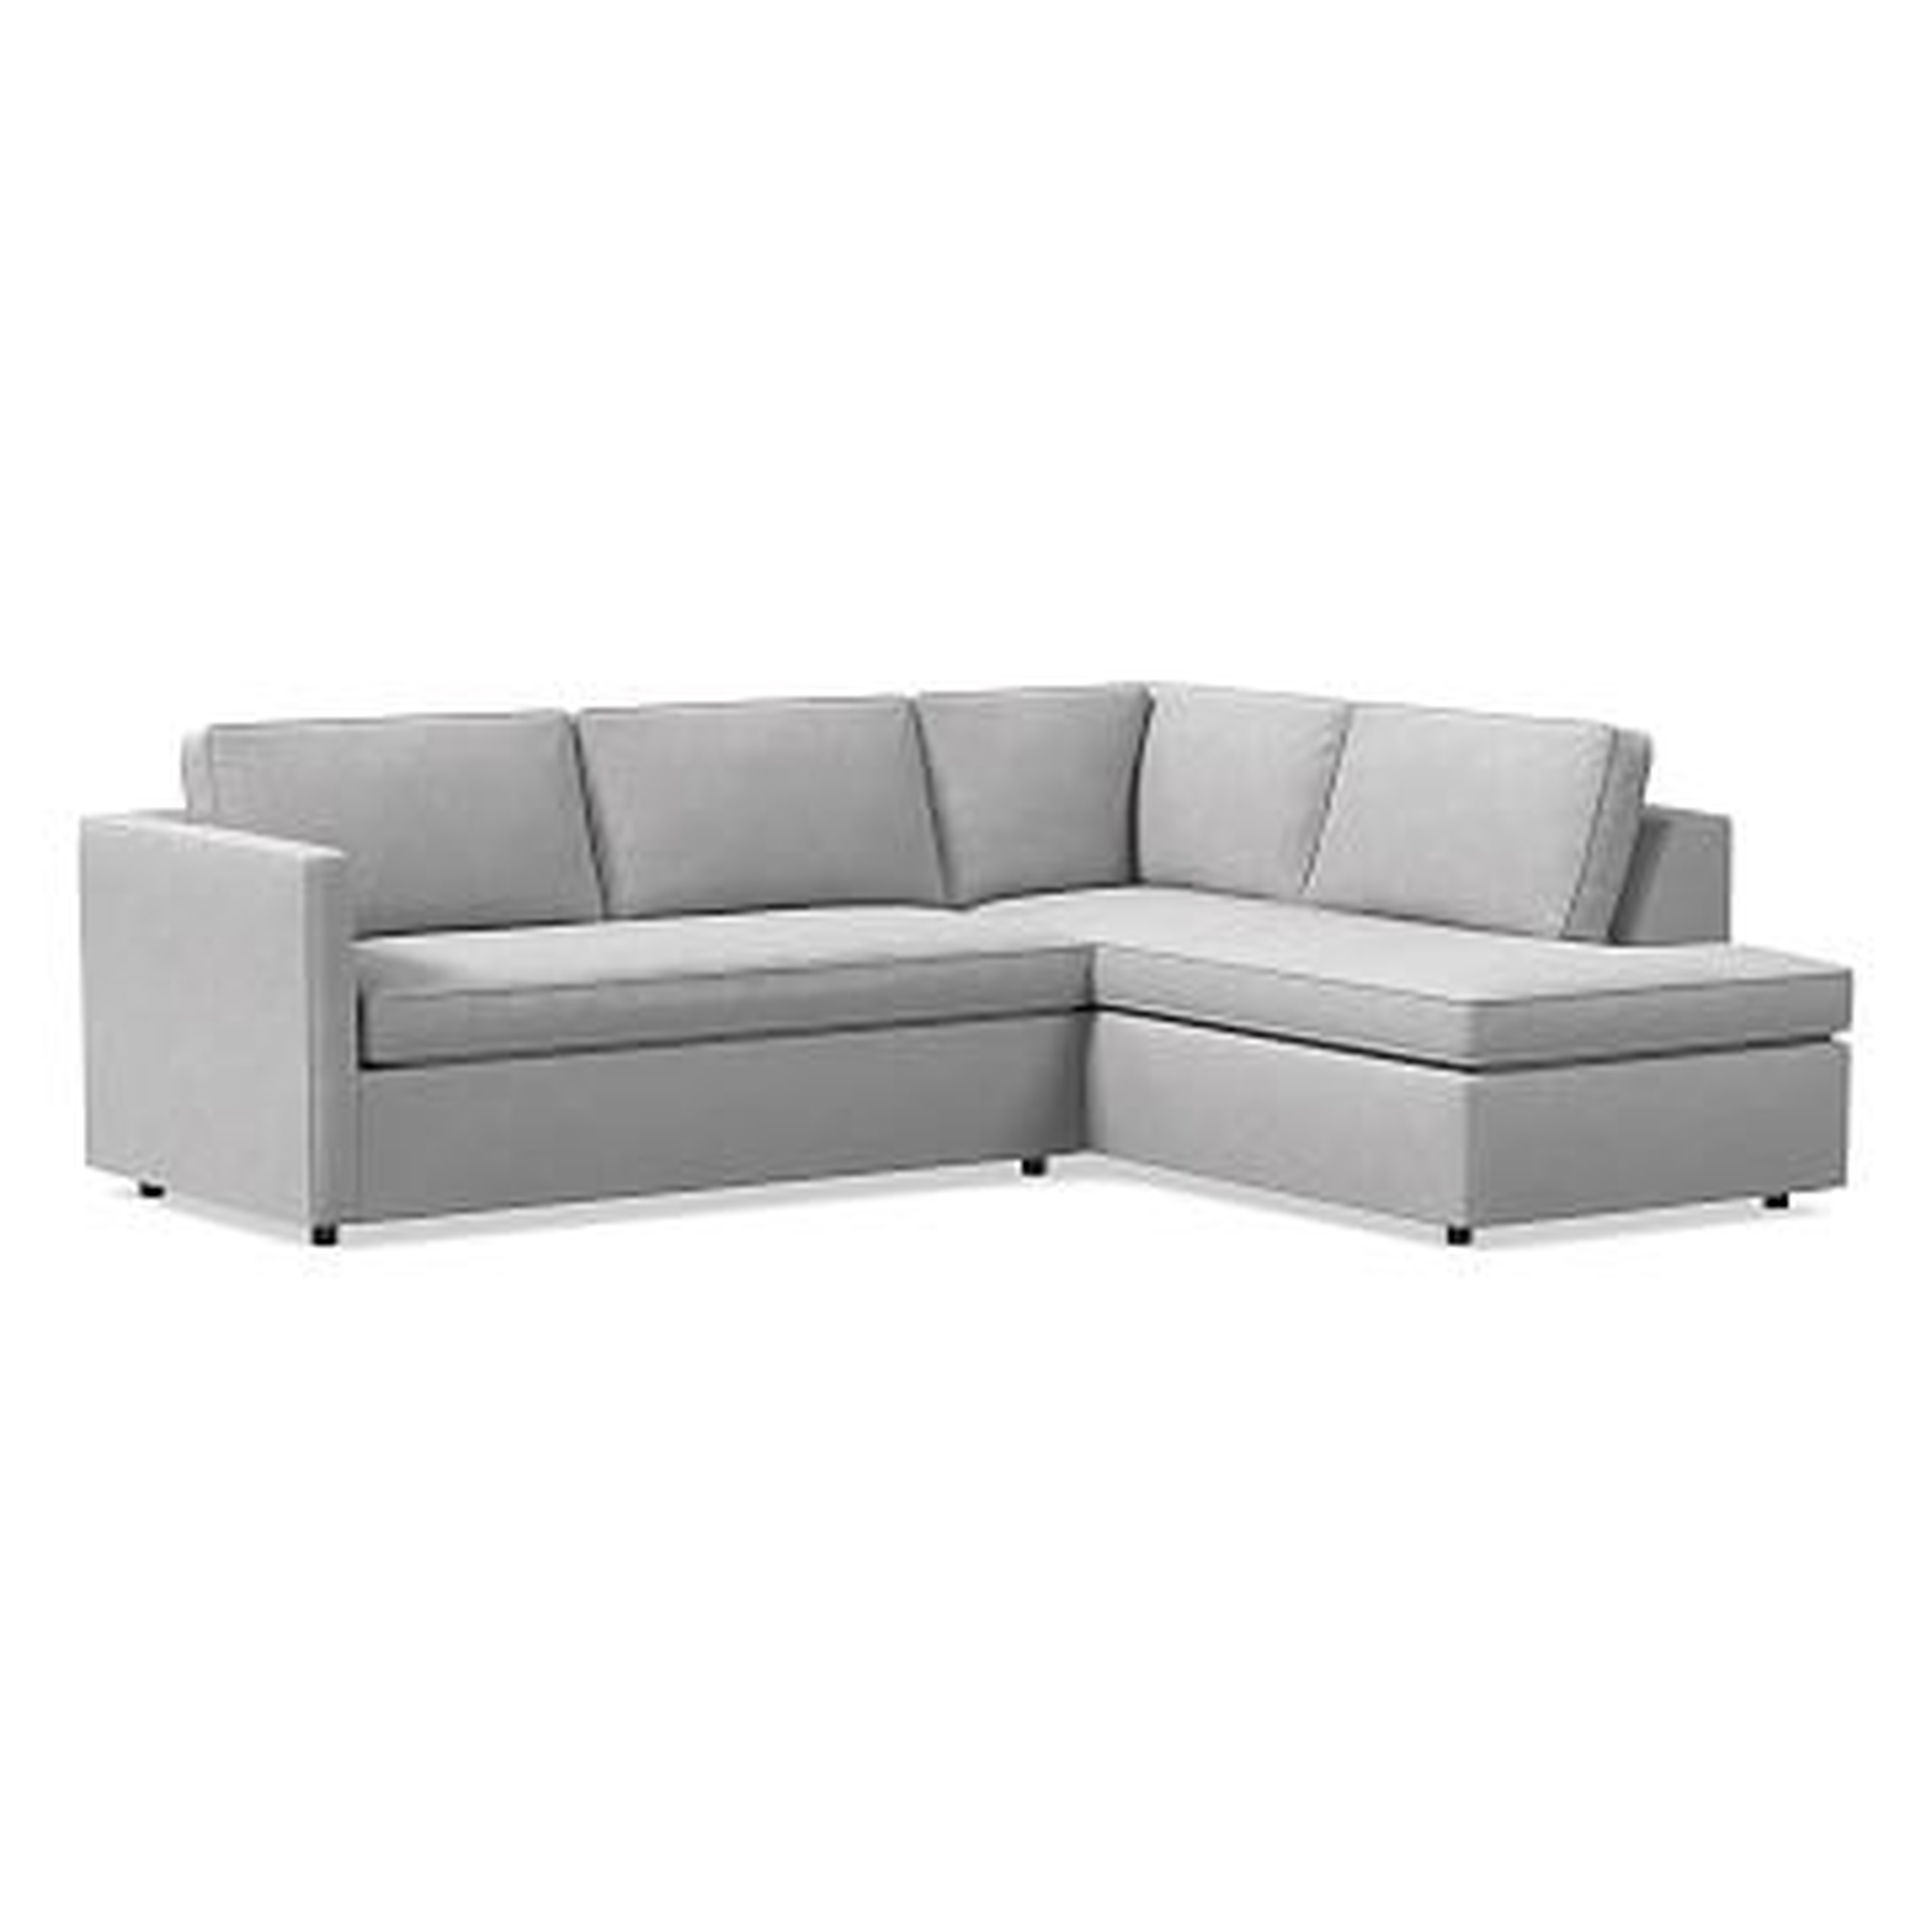 Harris 100" Right Bench Cushion 2-Piece Bumper Chaise Sectional, Petite Depth, Distressed Velvet, Frost Gray - West Elm